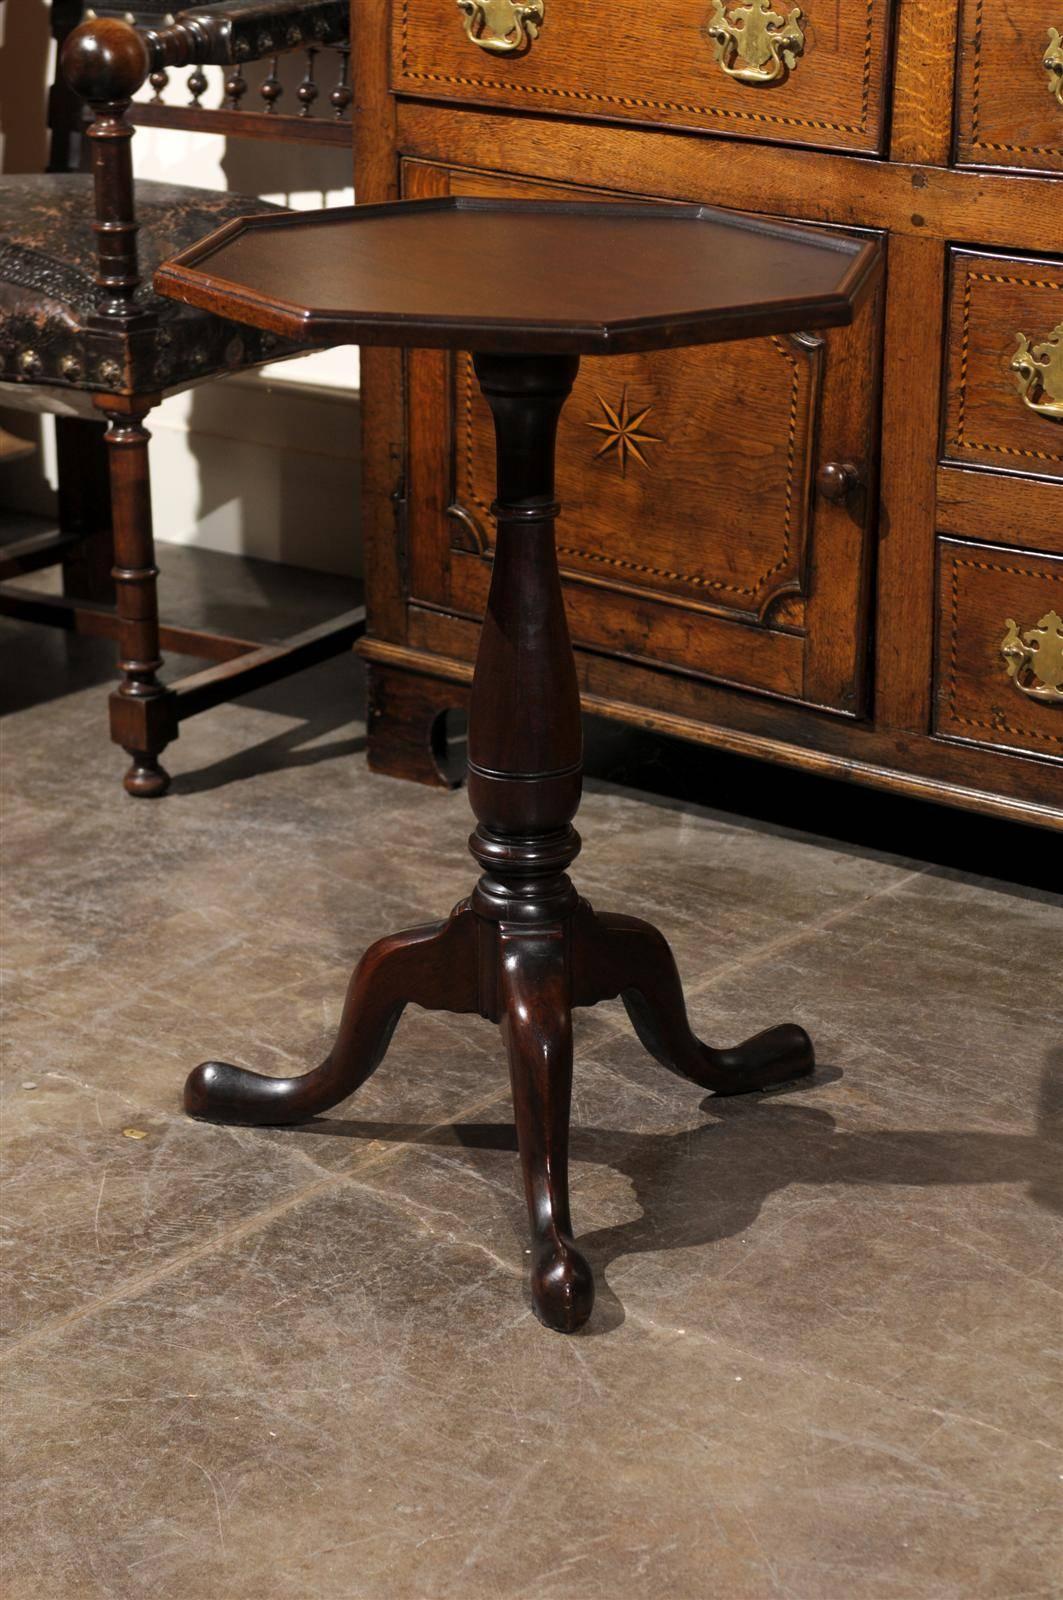 This English Georgian pedestal guéridon table from the late 18th century features an octagonal tray top with raised edge over a turned pedestal. The table gently rests on a tripod base. With a simple elegance, beautiful finish and convenient top,